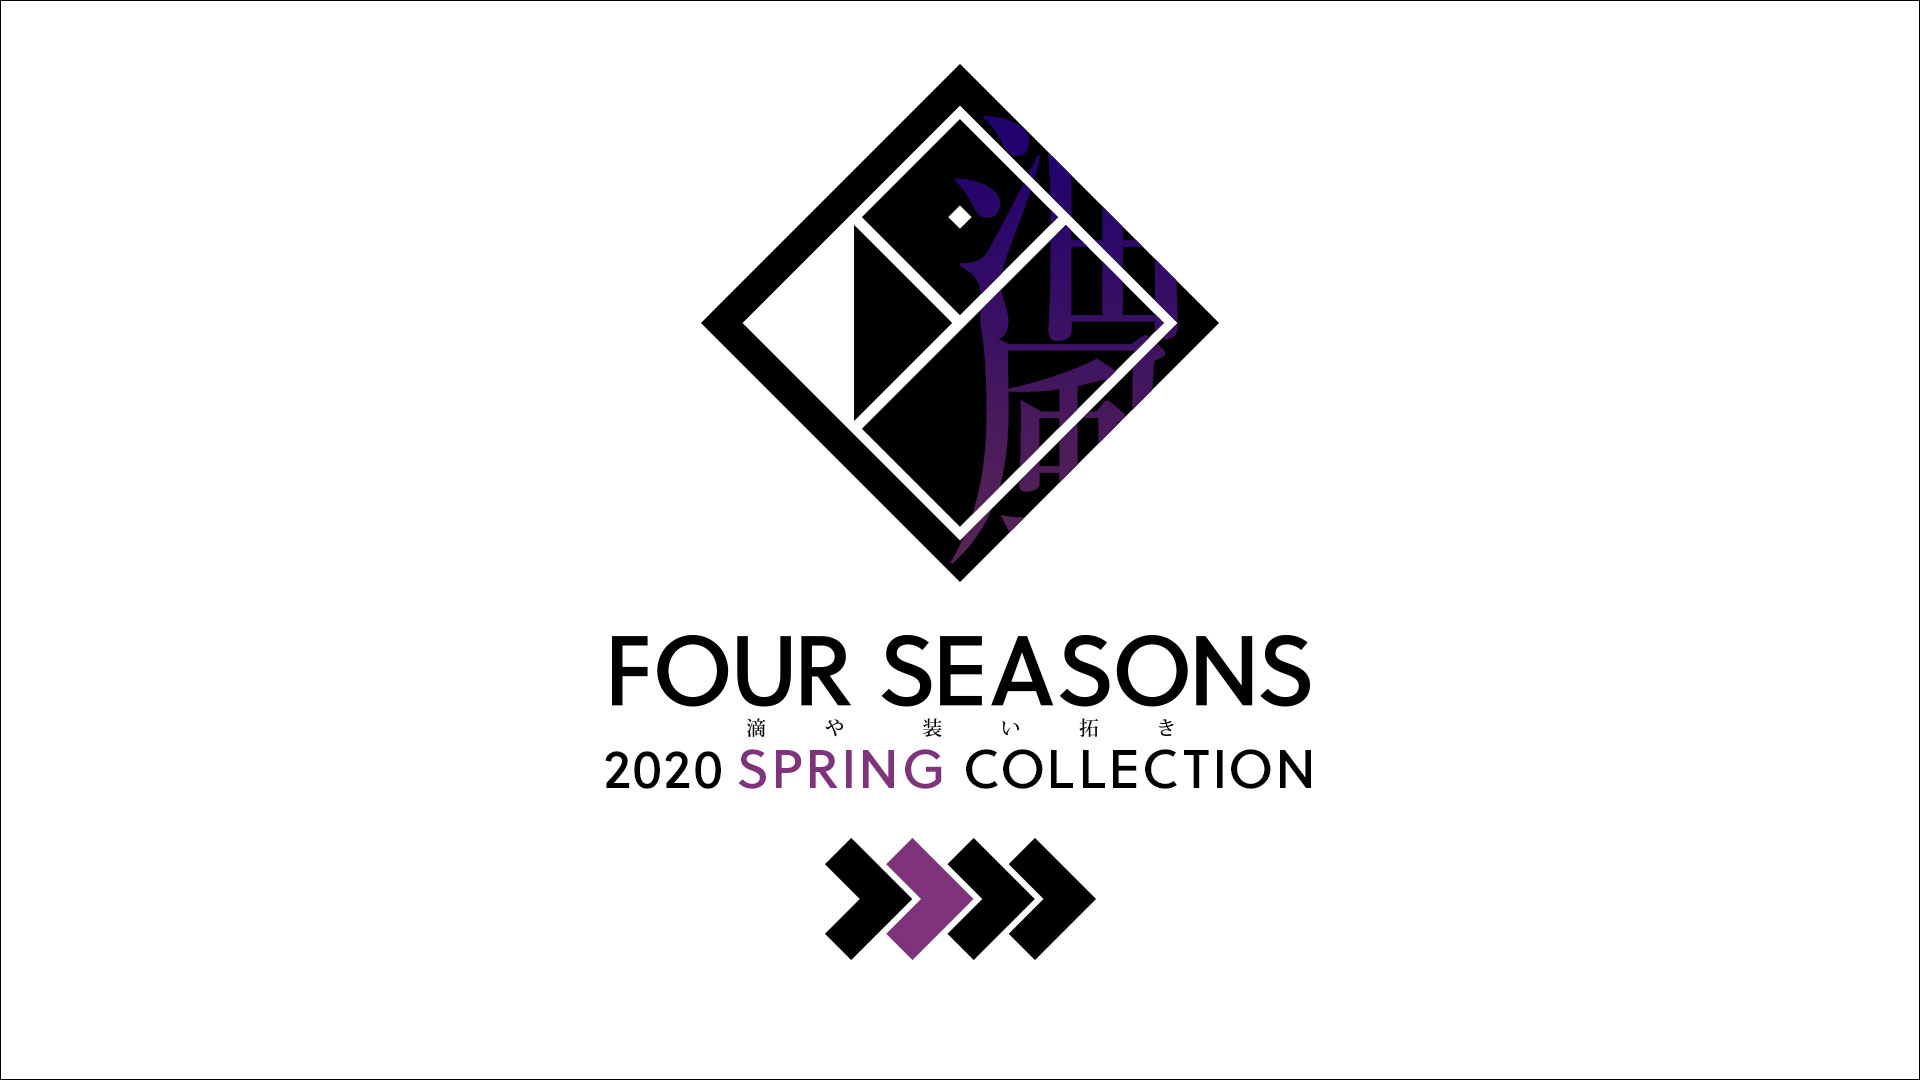 [PHOTO:FOUR SEASONS 2020 SPRING COLLECTION]